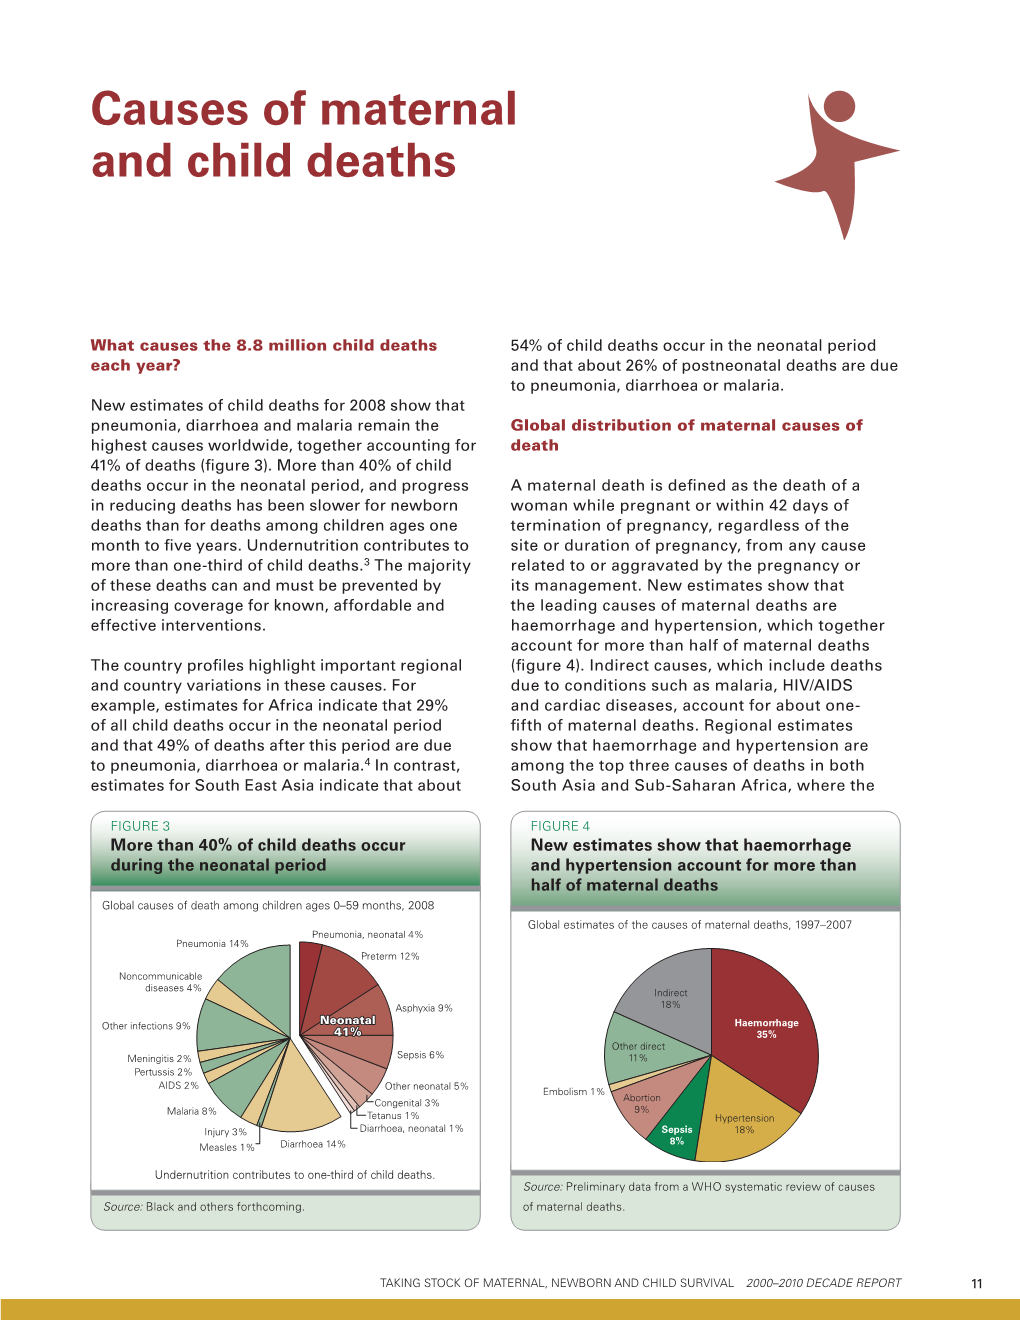 Causes of Maternal and Child Deaths